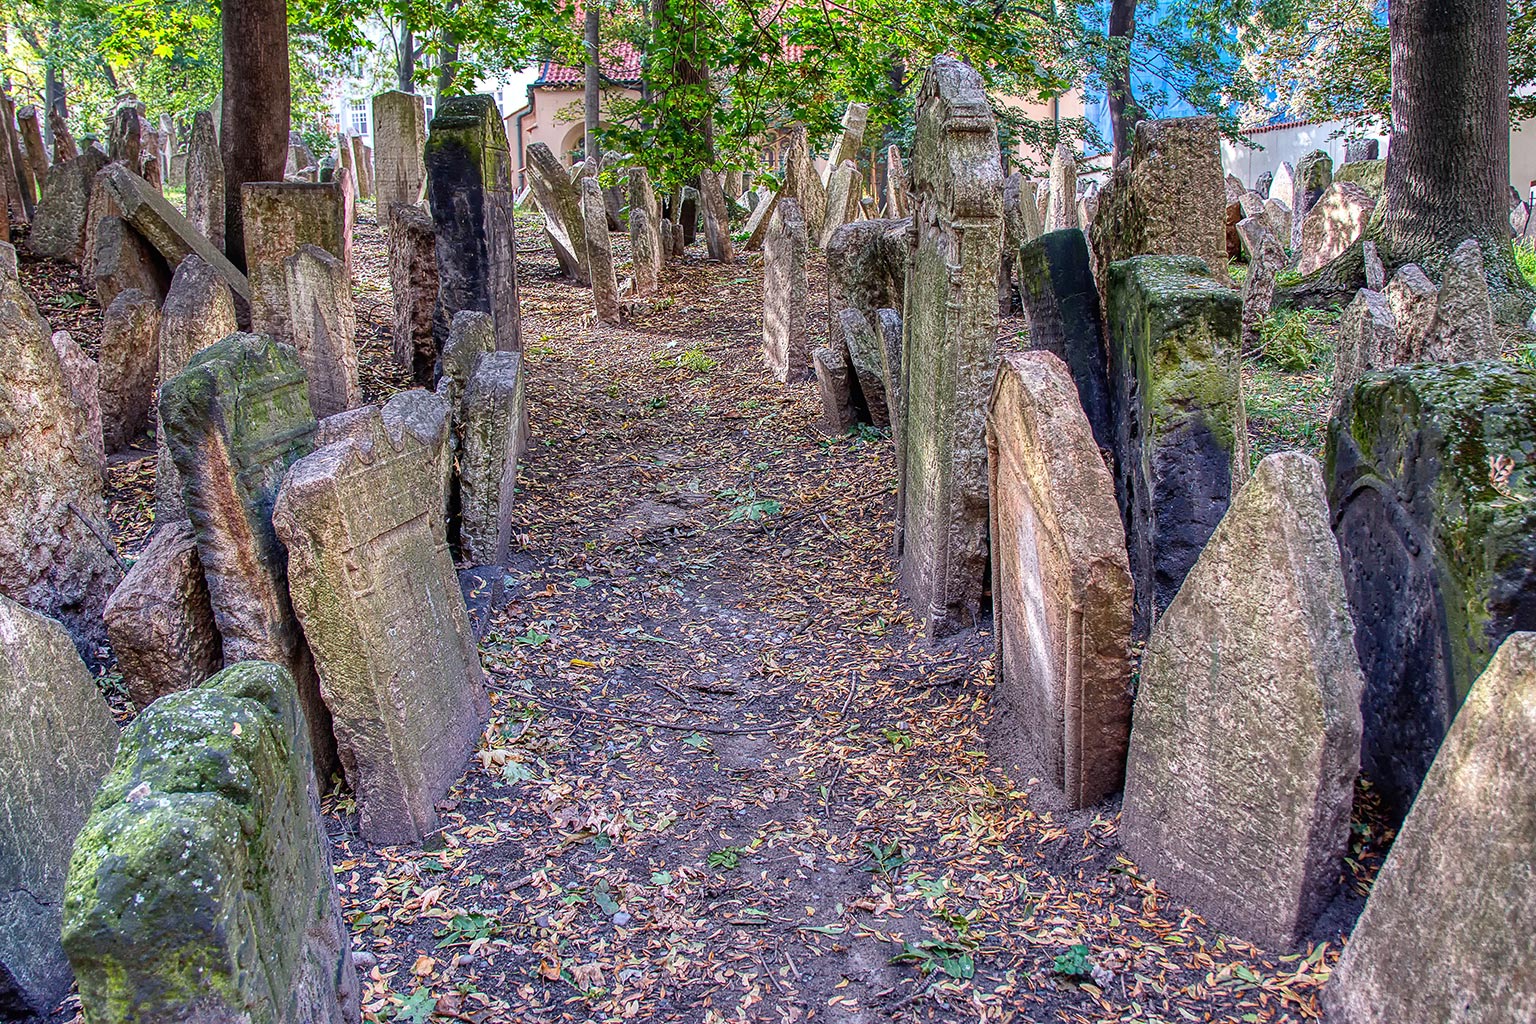 Tombstones on Old Jewish Cemetery in the Jewish Quarter in Prague.